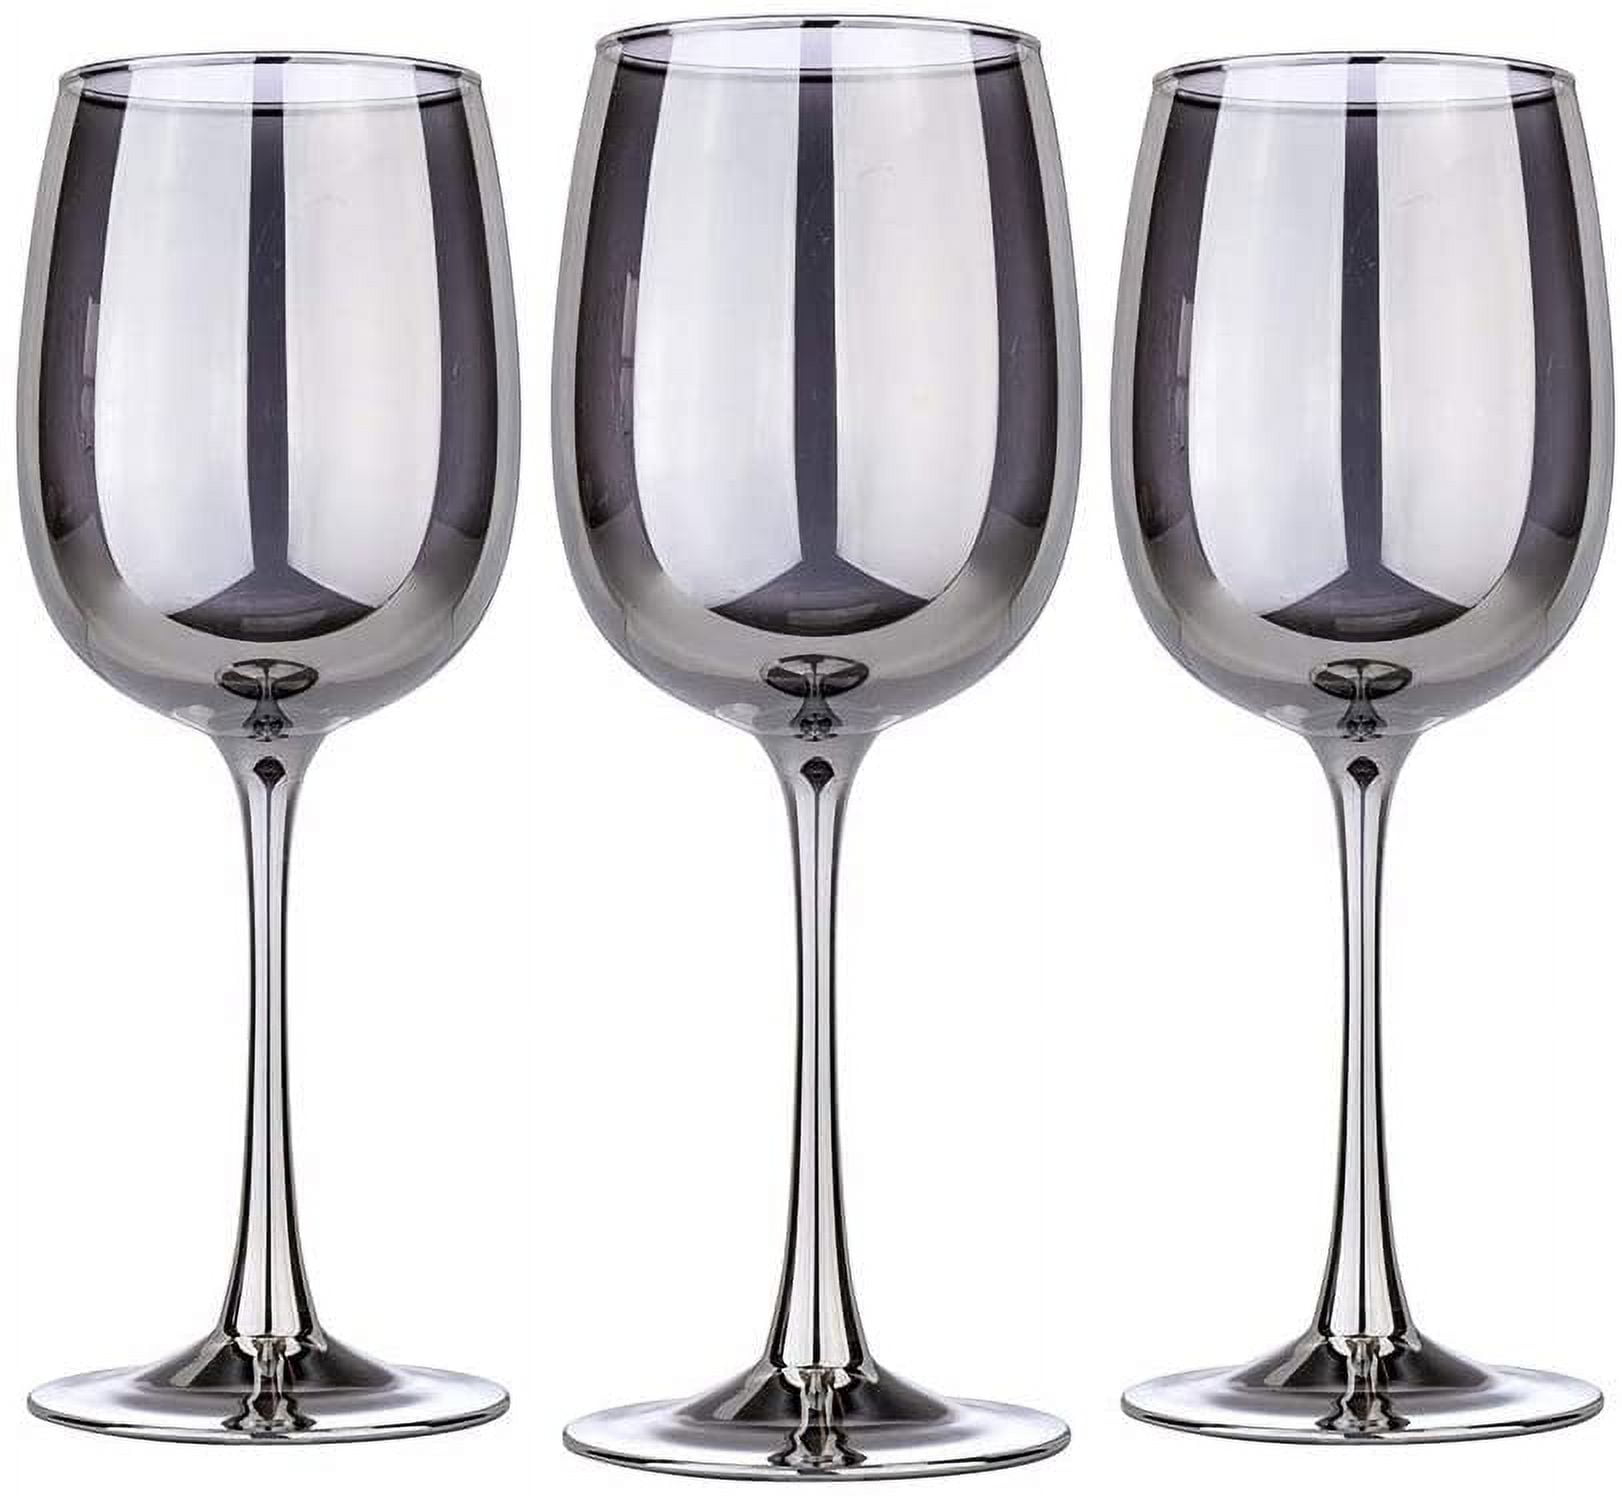 The 14 best wine glasses to buy (and how to choose them)